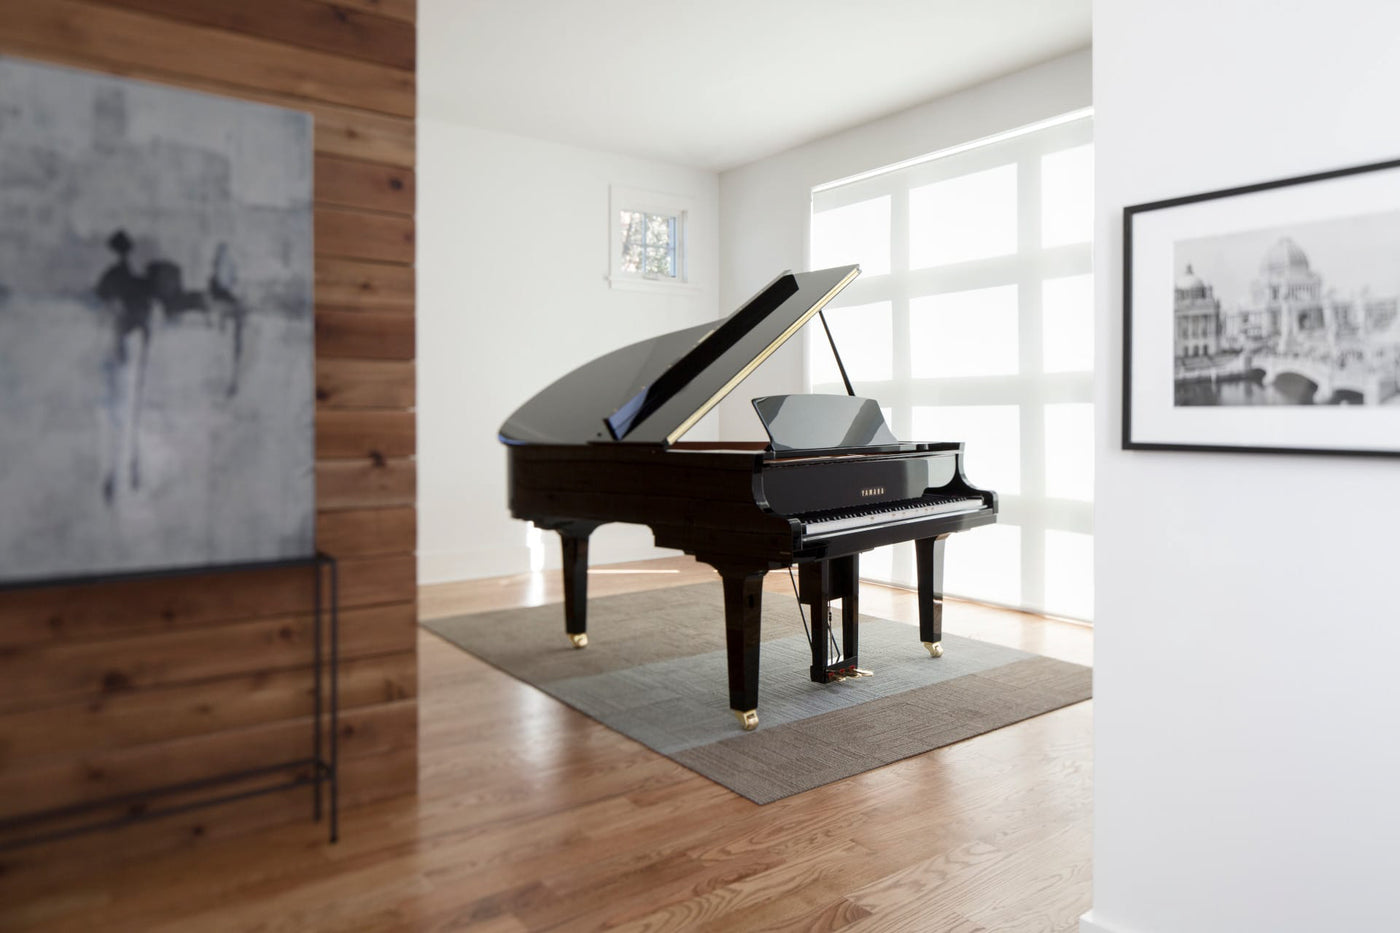 Elegant black grand piano positioned in a bright room with wood flooring, artwork on the walls, and large windows providing natural light.